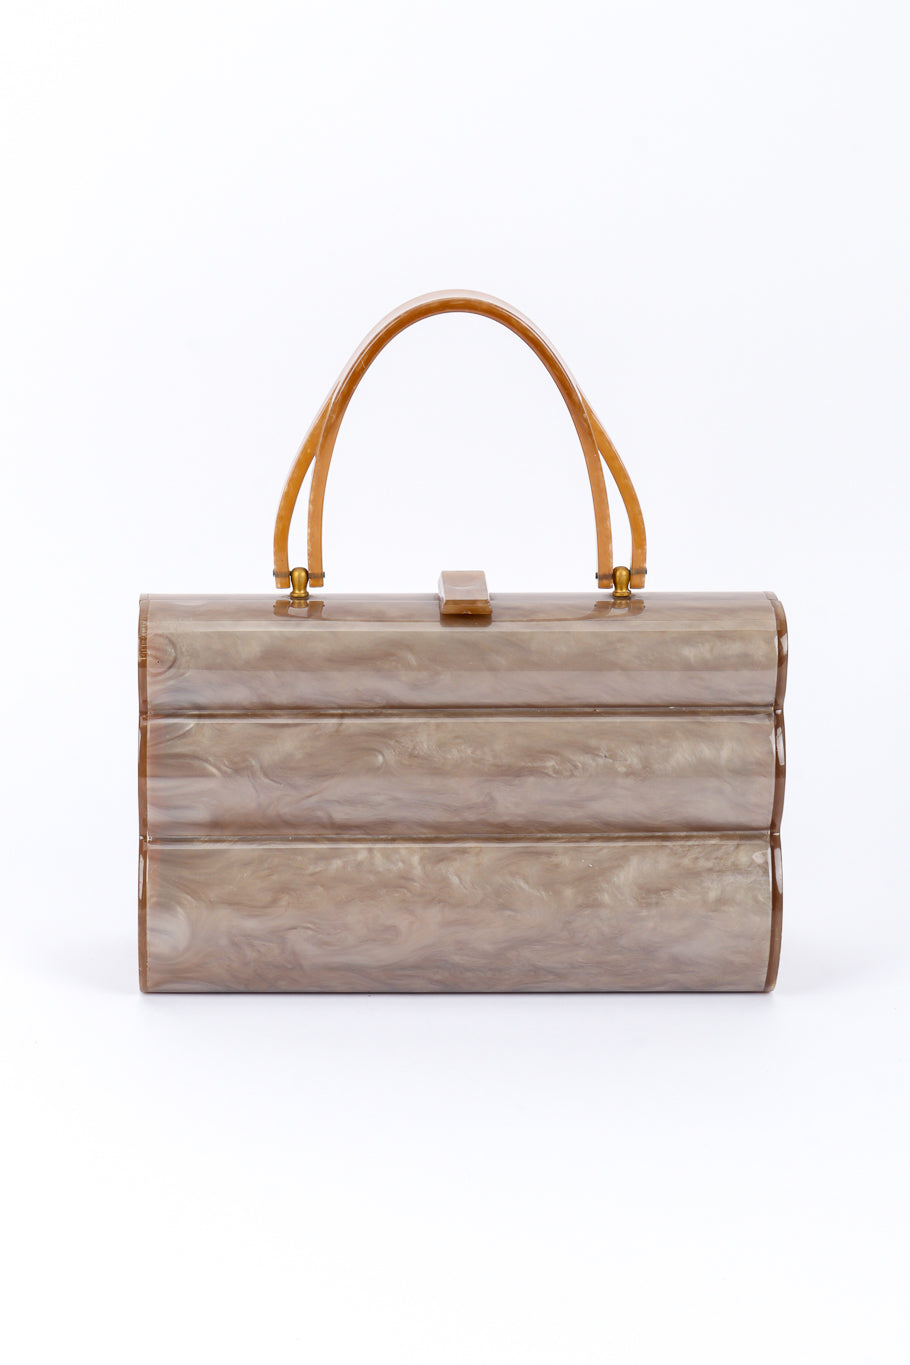 Tiered Pearlescent Lucite Case Bag front @recessla